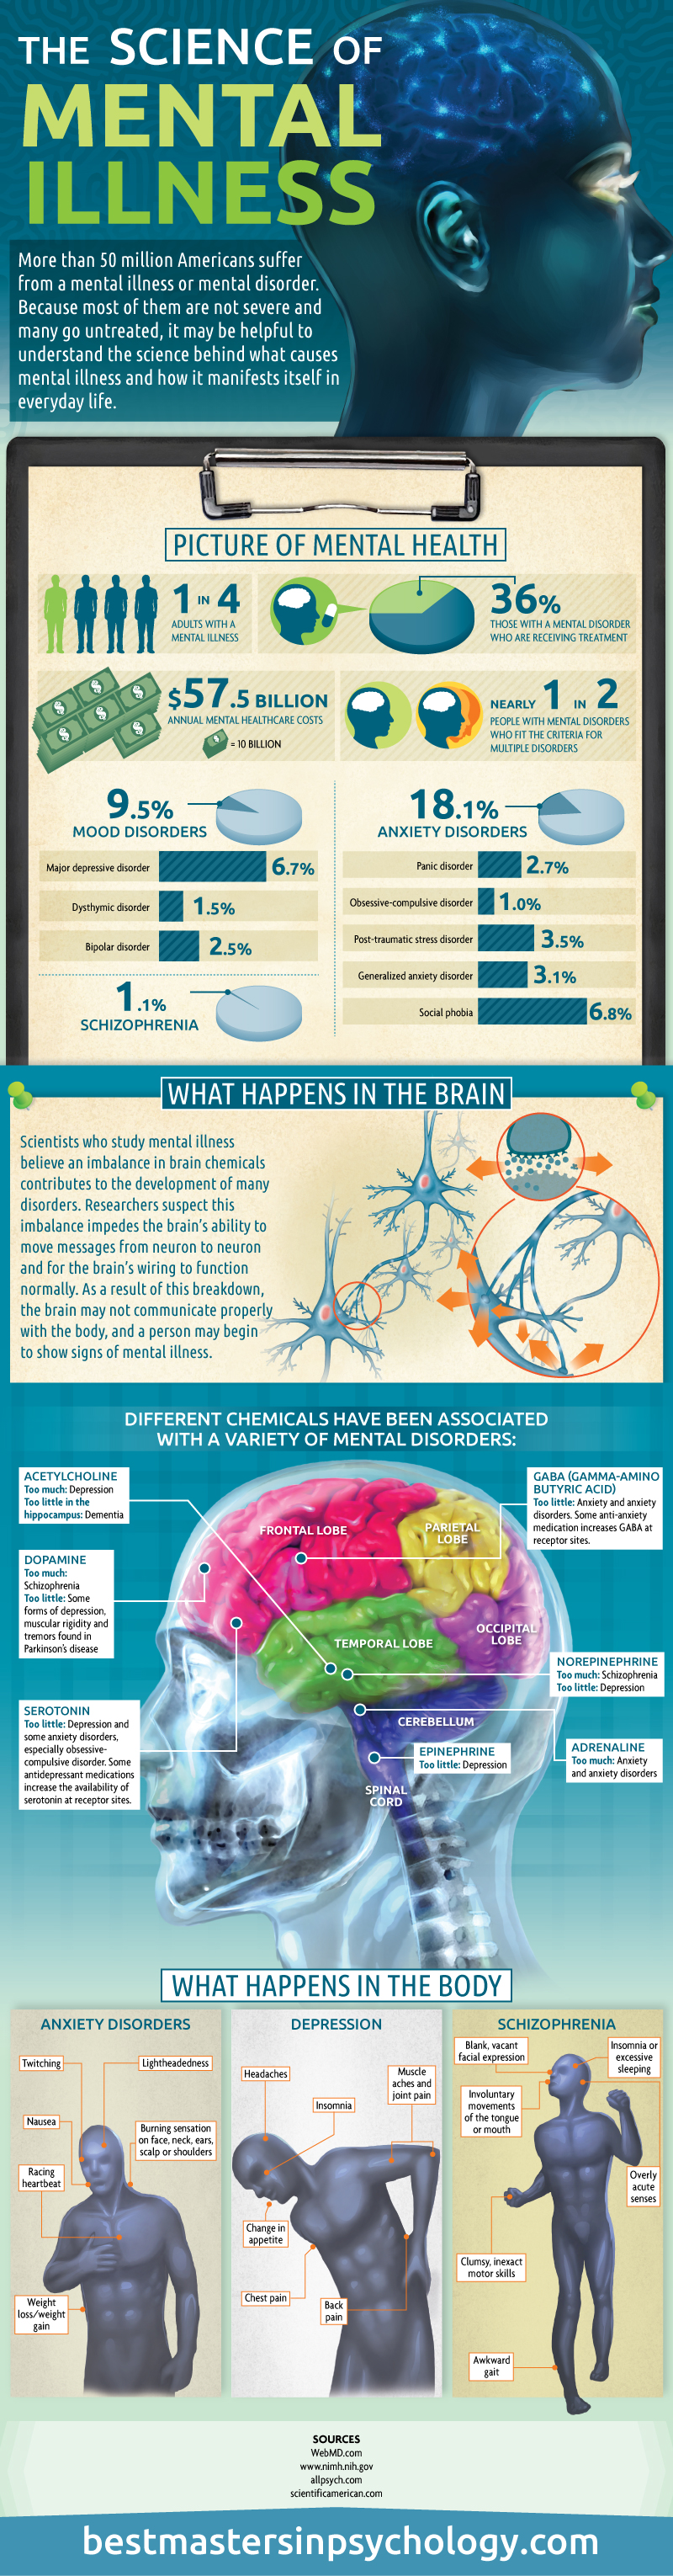 The-Science-of-Mental-Illness-Infographic